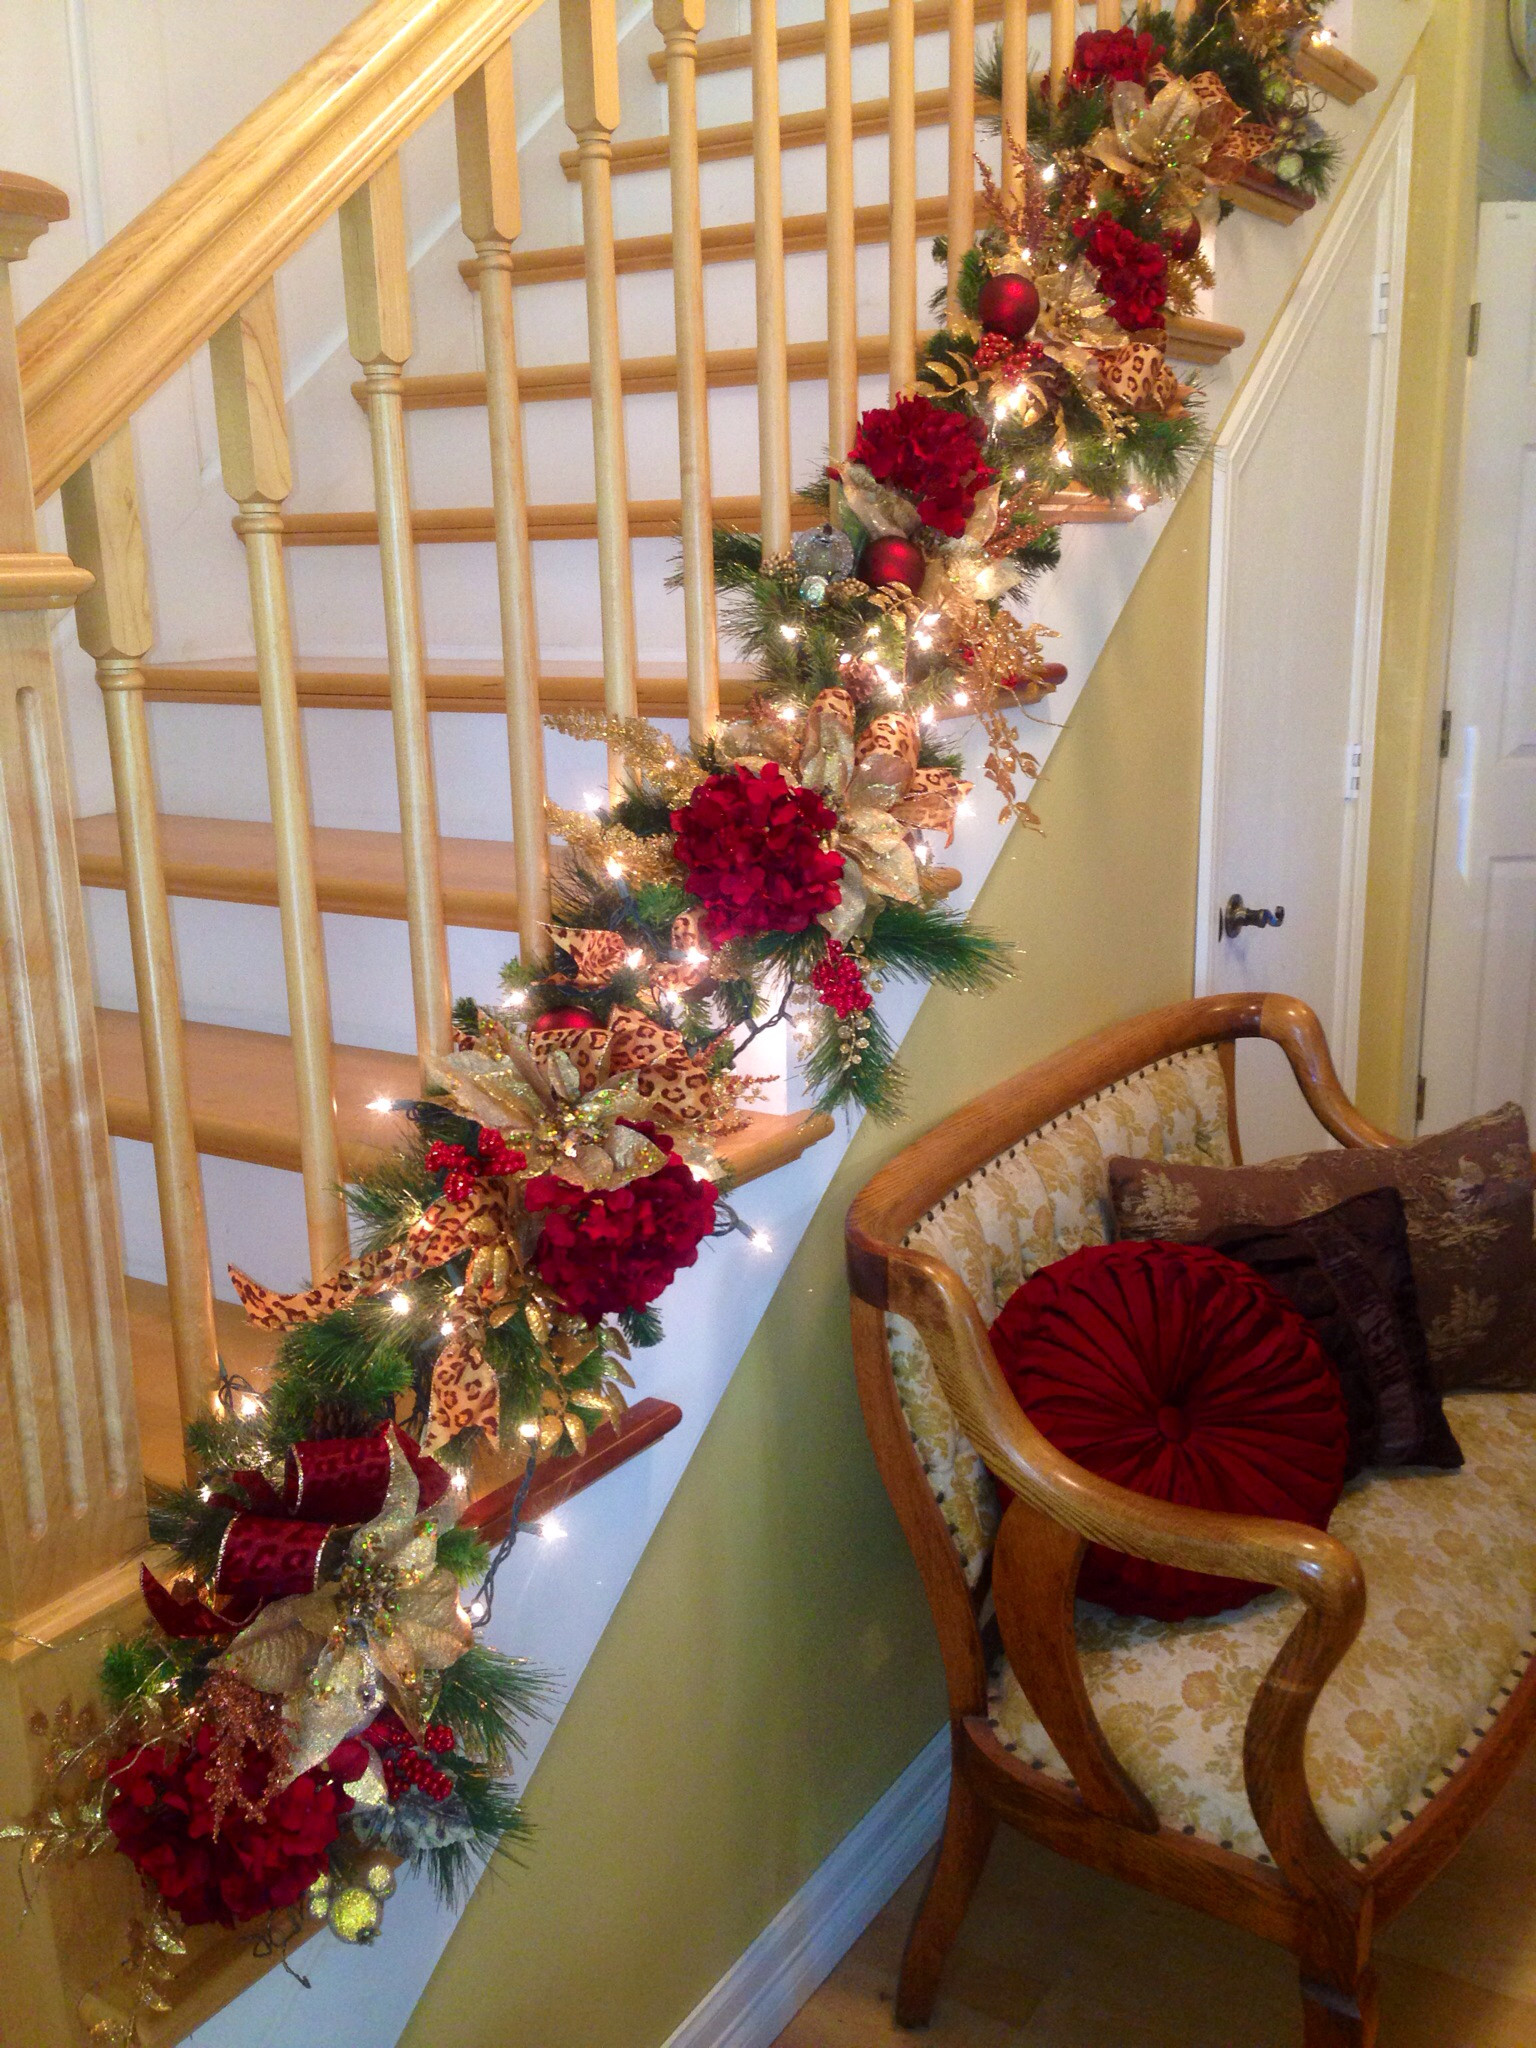 Staircase Christmas Decorating Ideas
 Decorate The Staircase For Christmas – 45 Beautiful Ideas